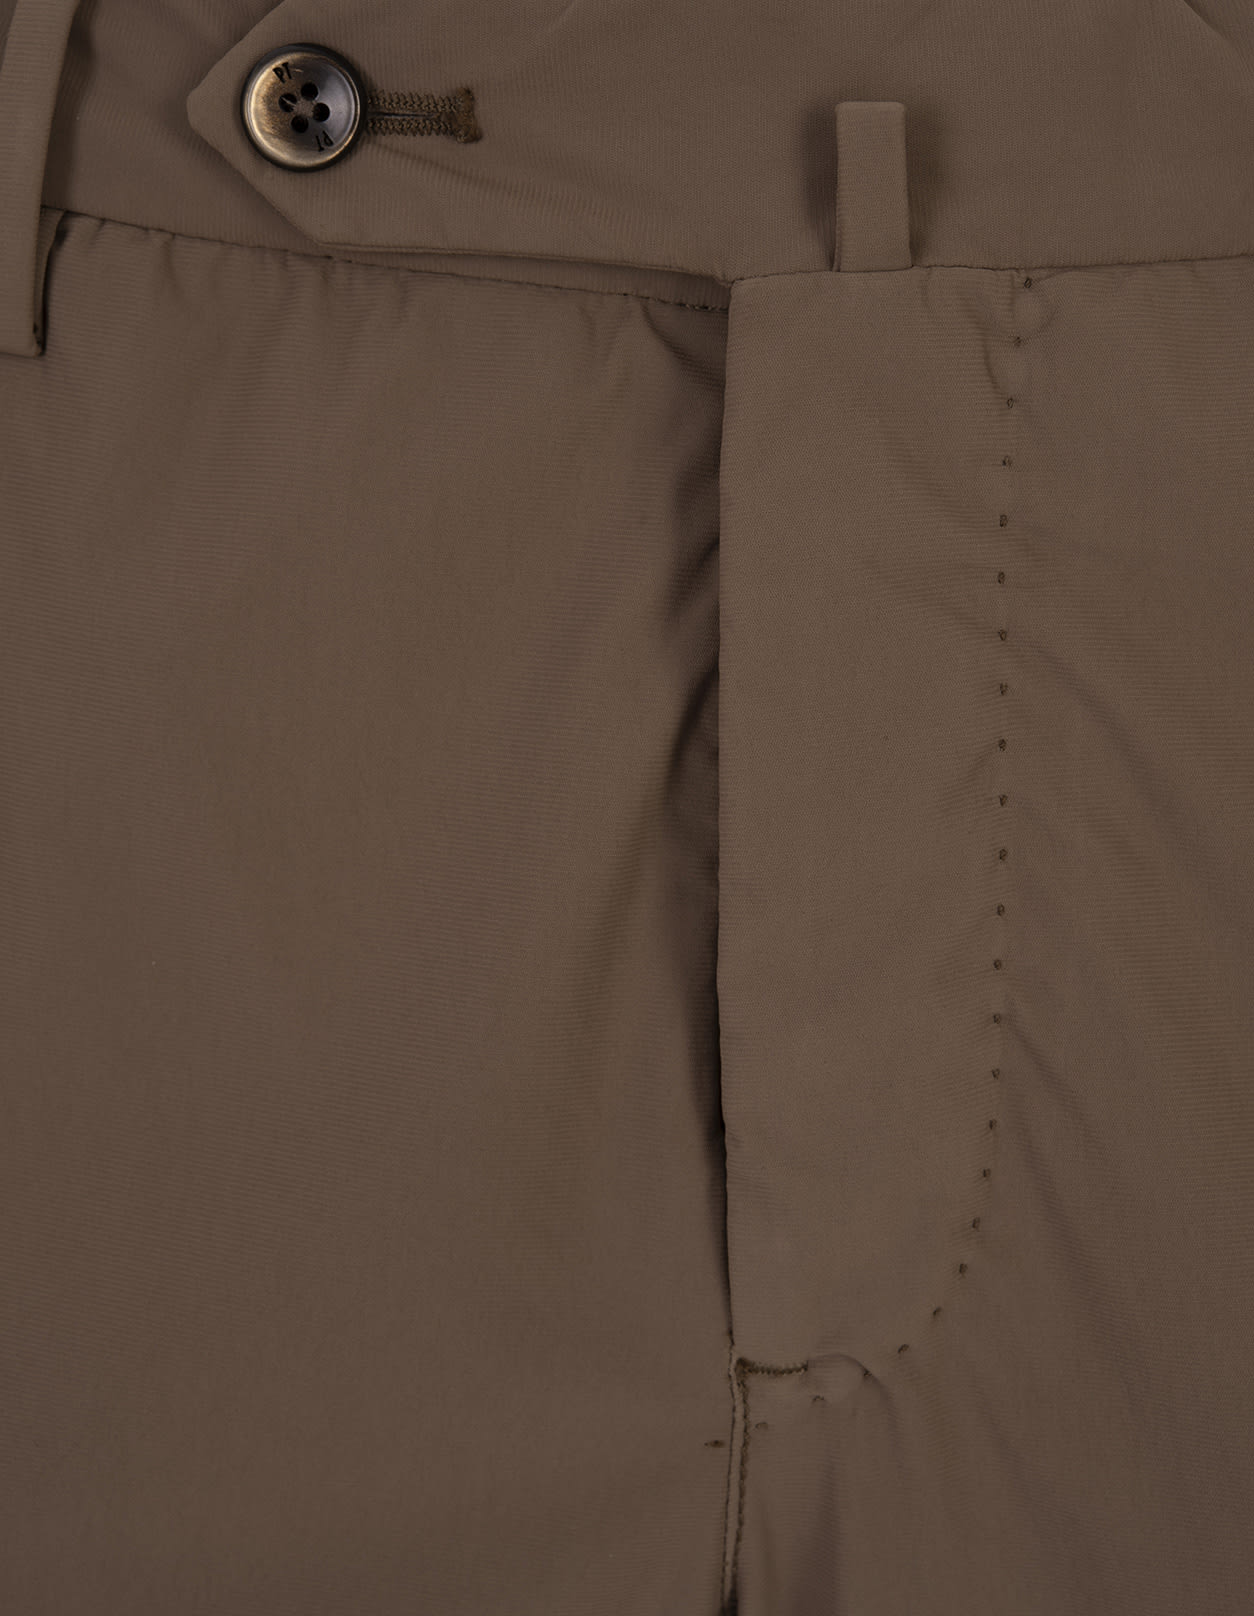 Shop Pt01 Brown Kinetic Fabric Classic Trousers